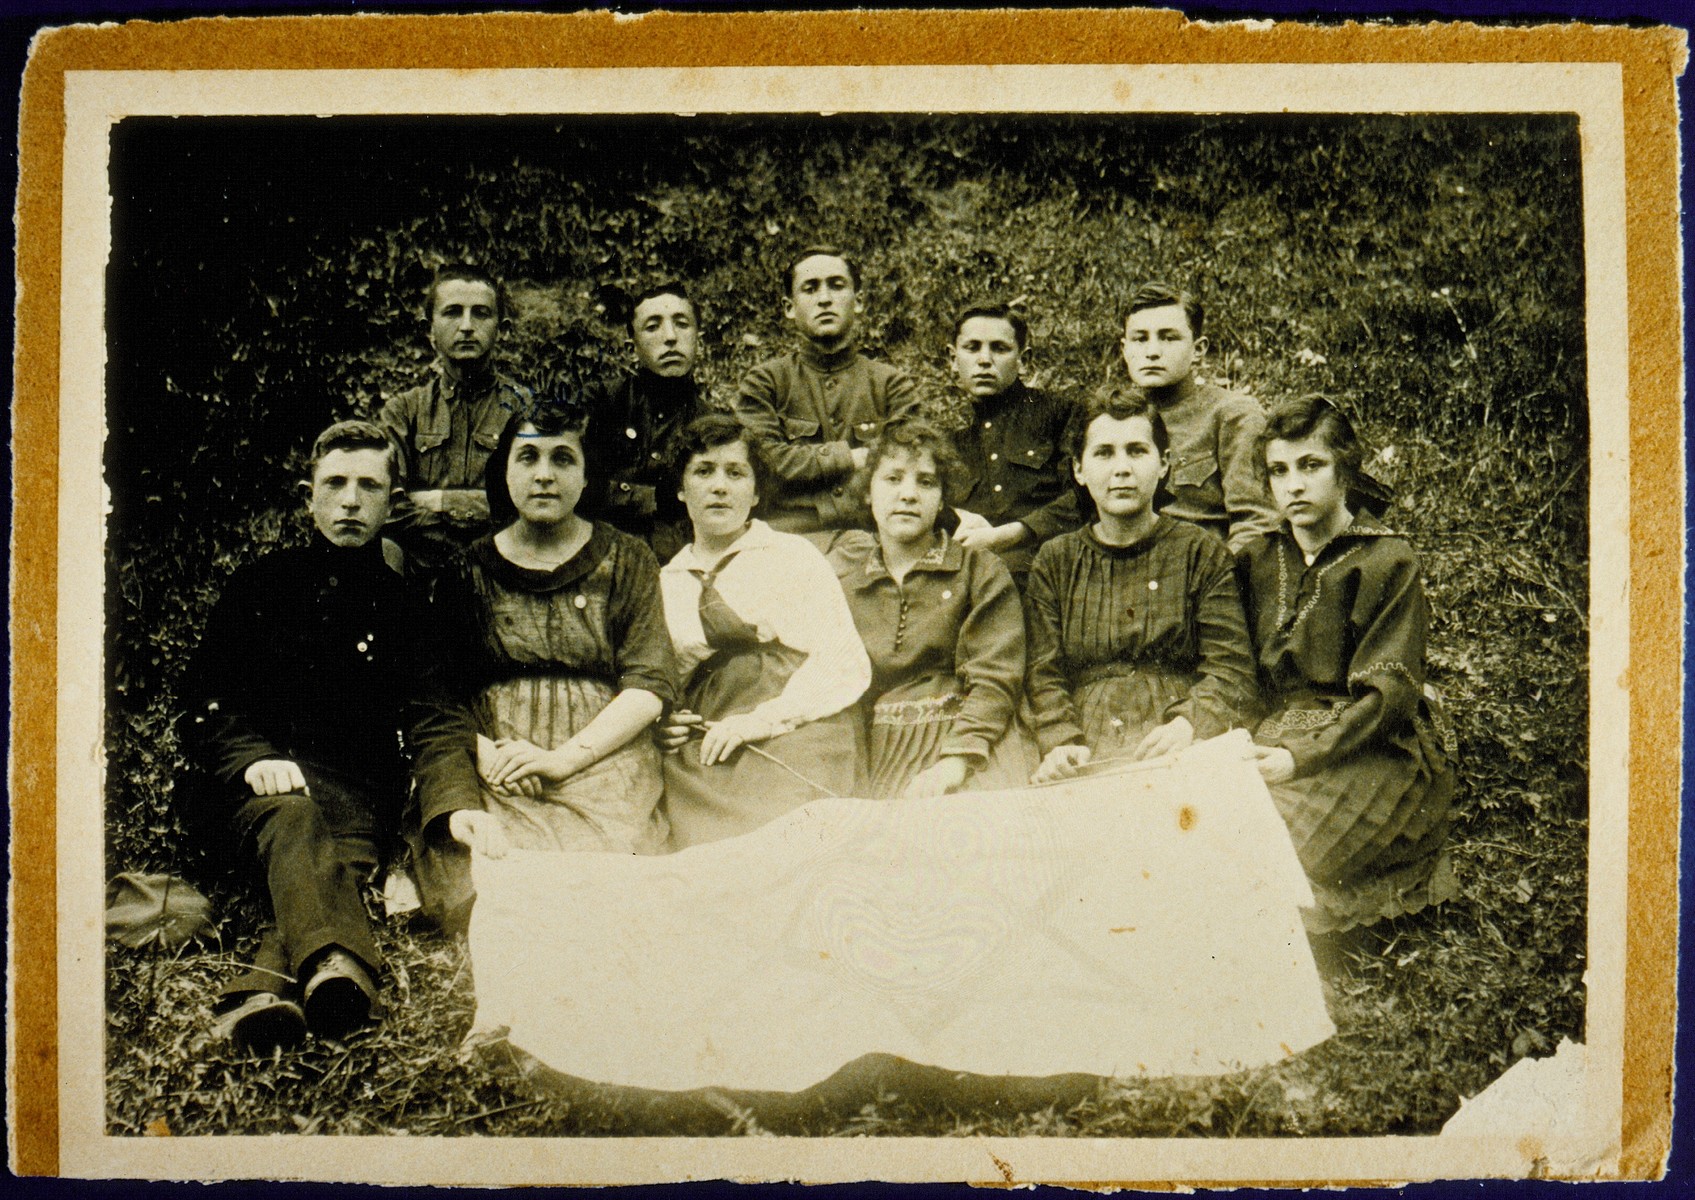 Members of the Zionist group Herut ve-Tehyia (Freedom and Revival) pose in front of the group's banner. 
  
Front row from right to left: Itta-Malka Pachianko, Esther Dwilanski, Zipporah Nochomowicz, Hannah Koppelman, Zipporah Lubetski Tokatli and Shlomo Cofnas.  Top row from right to left: Peretz Kaleko, Shaul Schneider, Zeev Kaganowicz, Shlomo Kiuchefski and Shalom Sonenson.  

Zipporah Lubetski Tokatli, Hannah Koppelman, Shaul Schneider and Peretz Kaleko immigrated to Palestine. Zipporah Nochomowicz immigrated to South America.  Shalom Sonenson  survived the Holocaust in hiding.  Itta-Malka Pachiano was murdered during the Holocaust.  Shlomo Kiuchefski was murdered by members of the Polish Home Army.